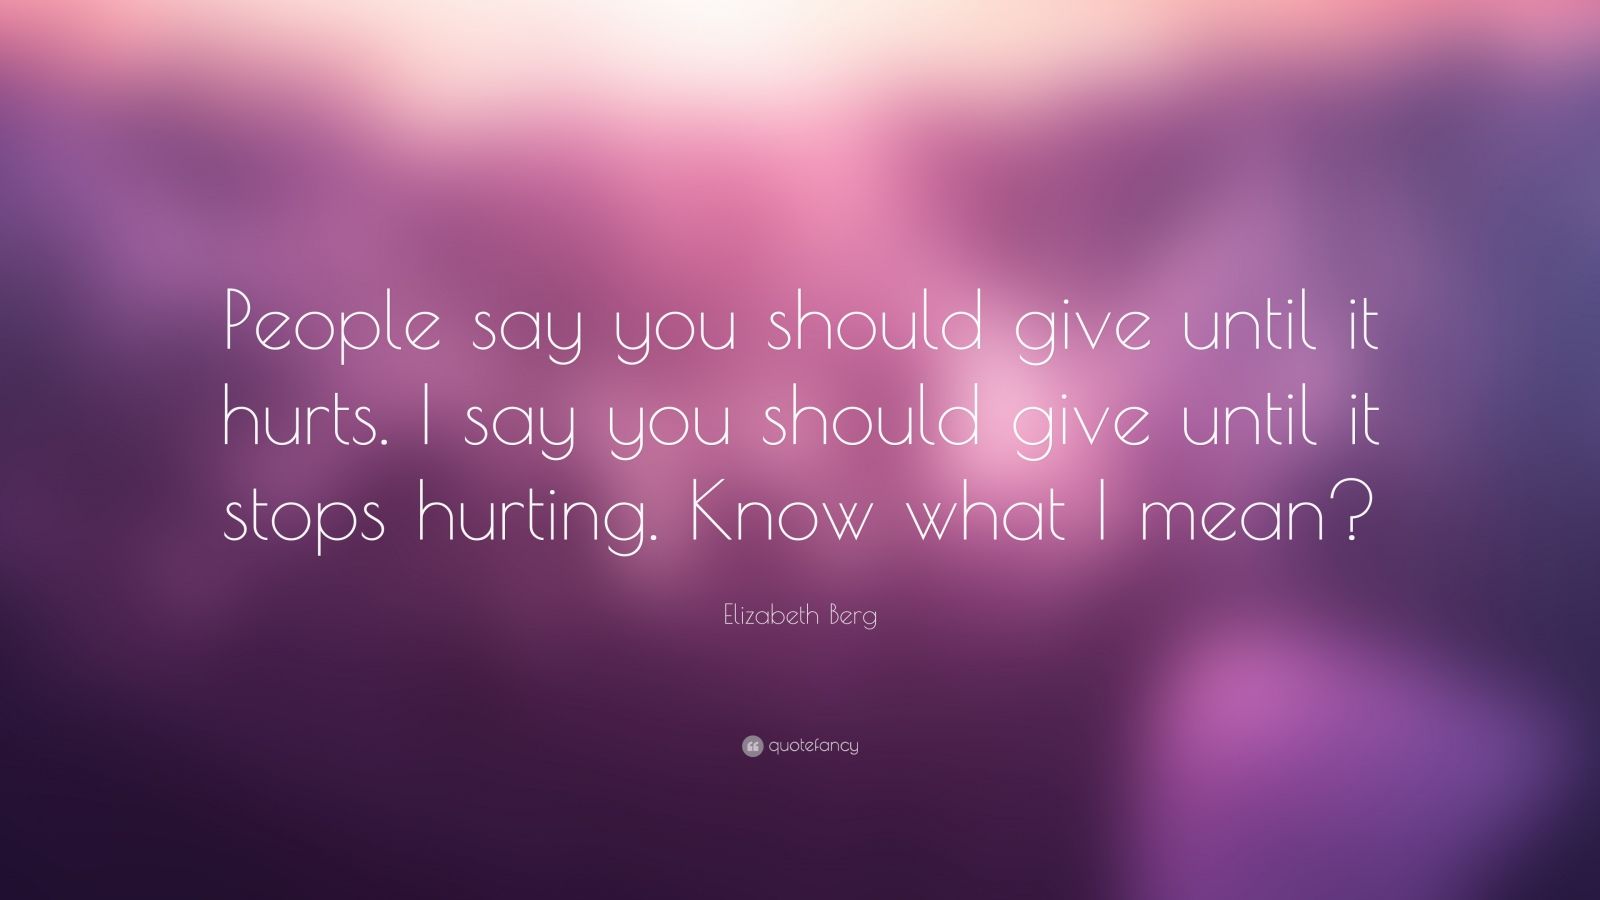 Elizabeth Berg Quote: “People say you should give until it hurts. I say ...